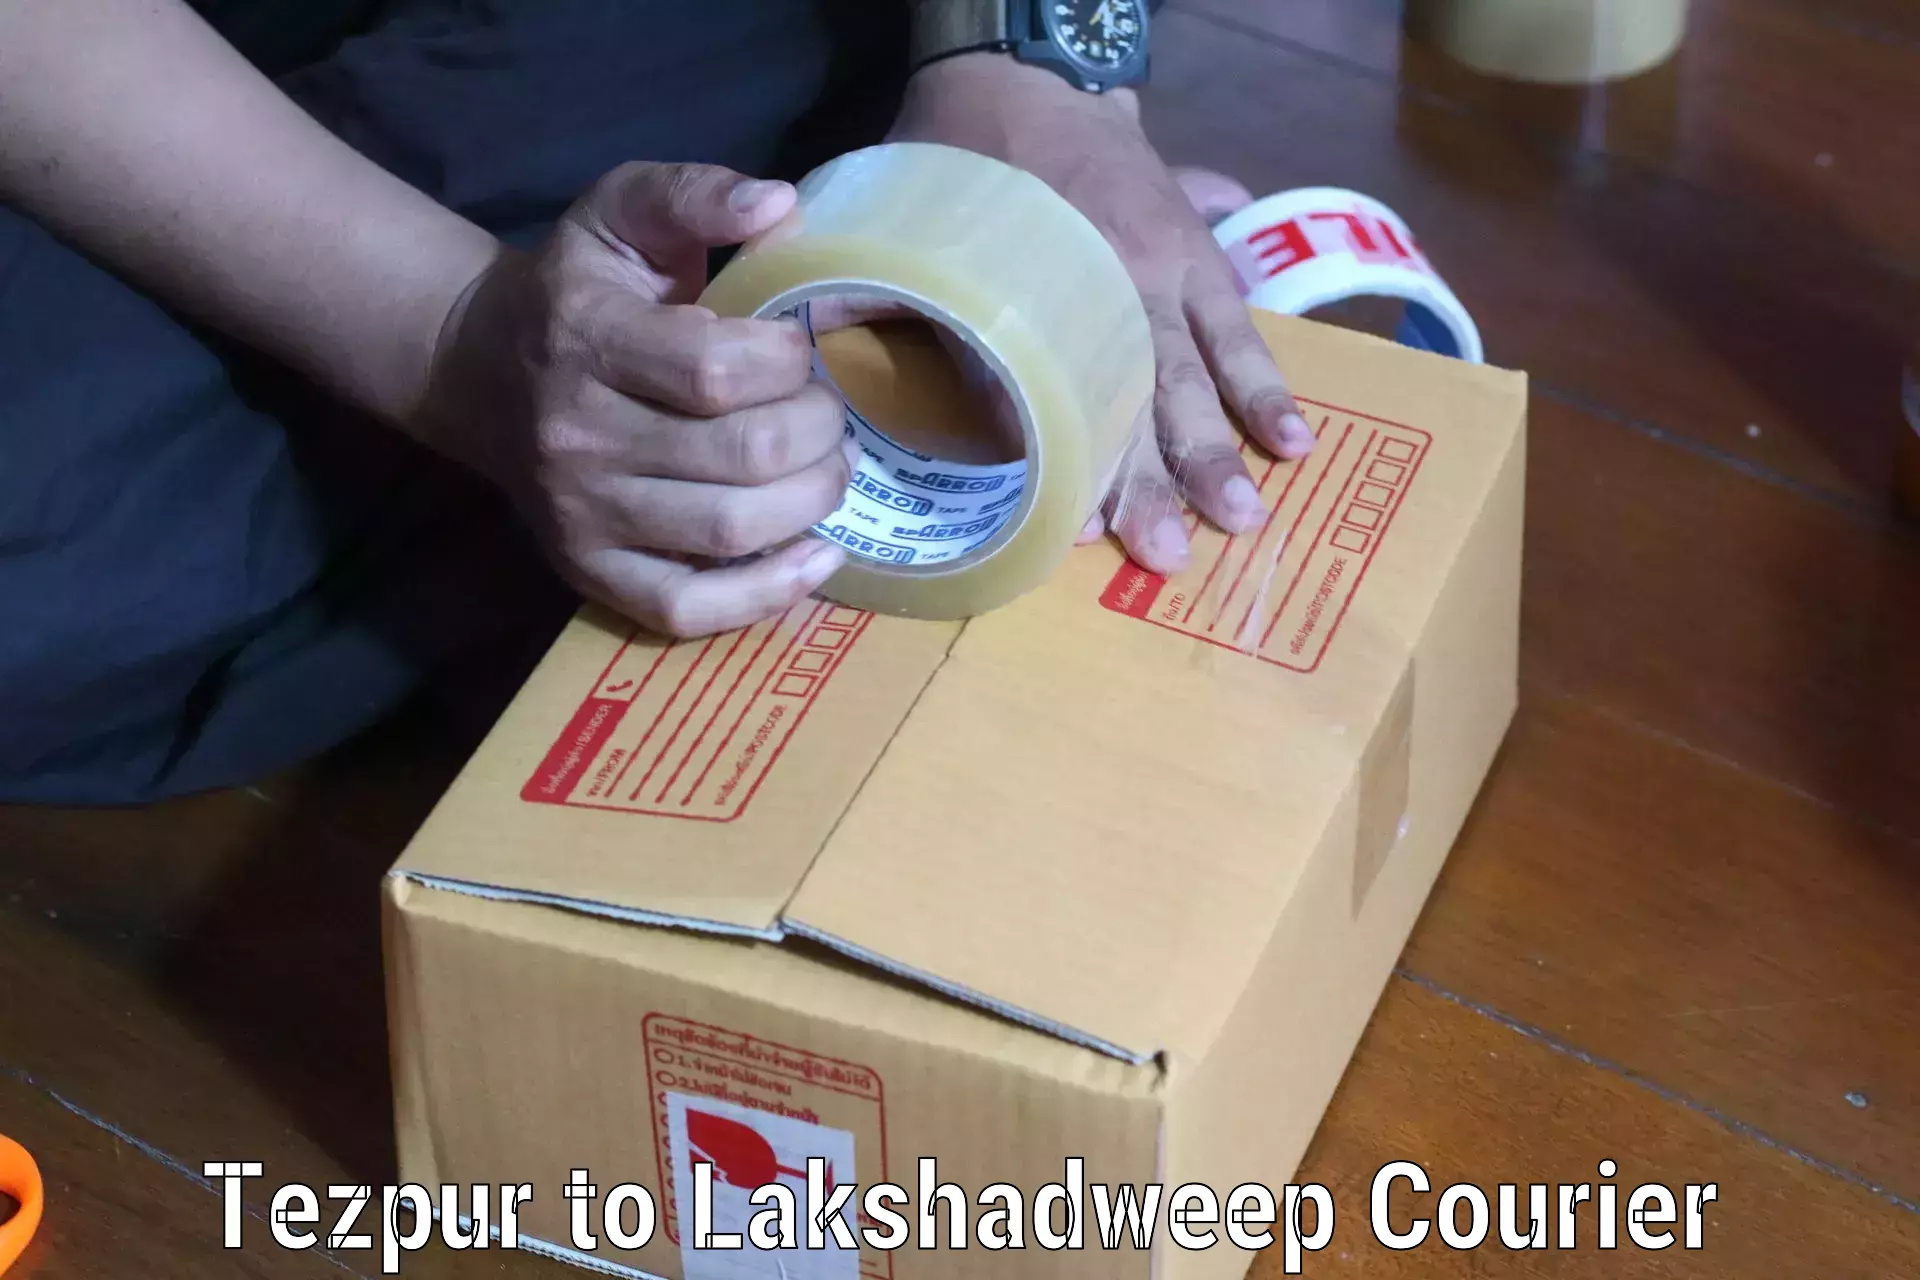 Local delivery service Tezpur to Lakshadweep